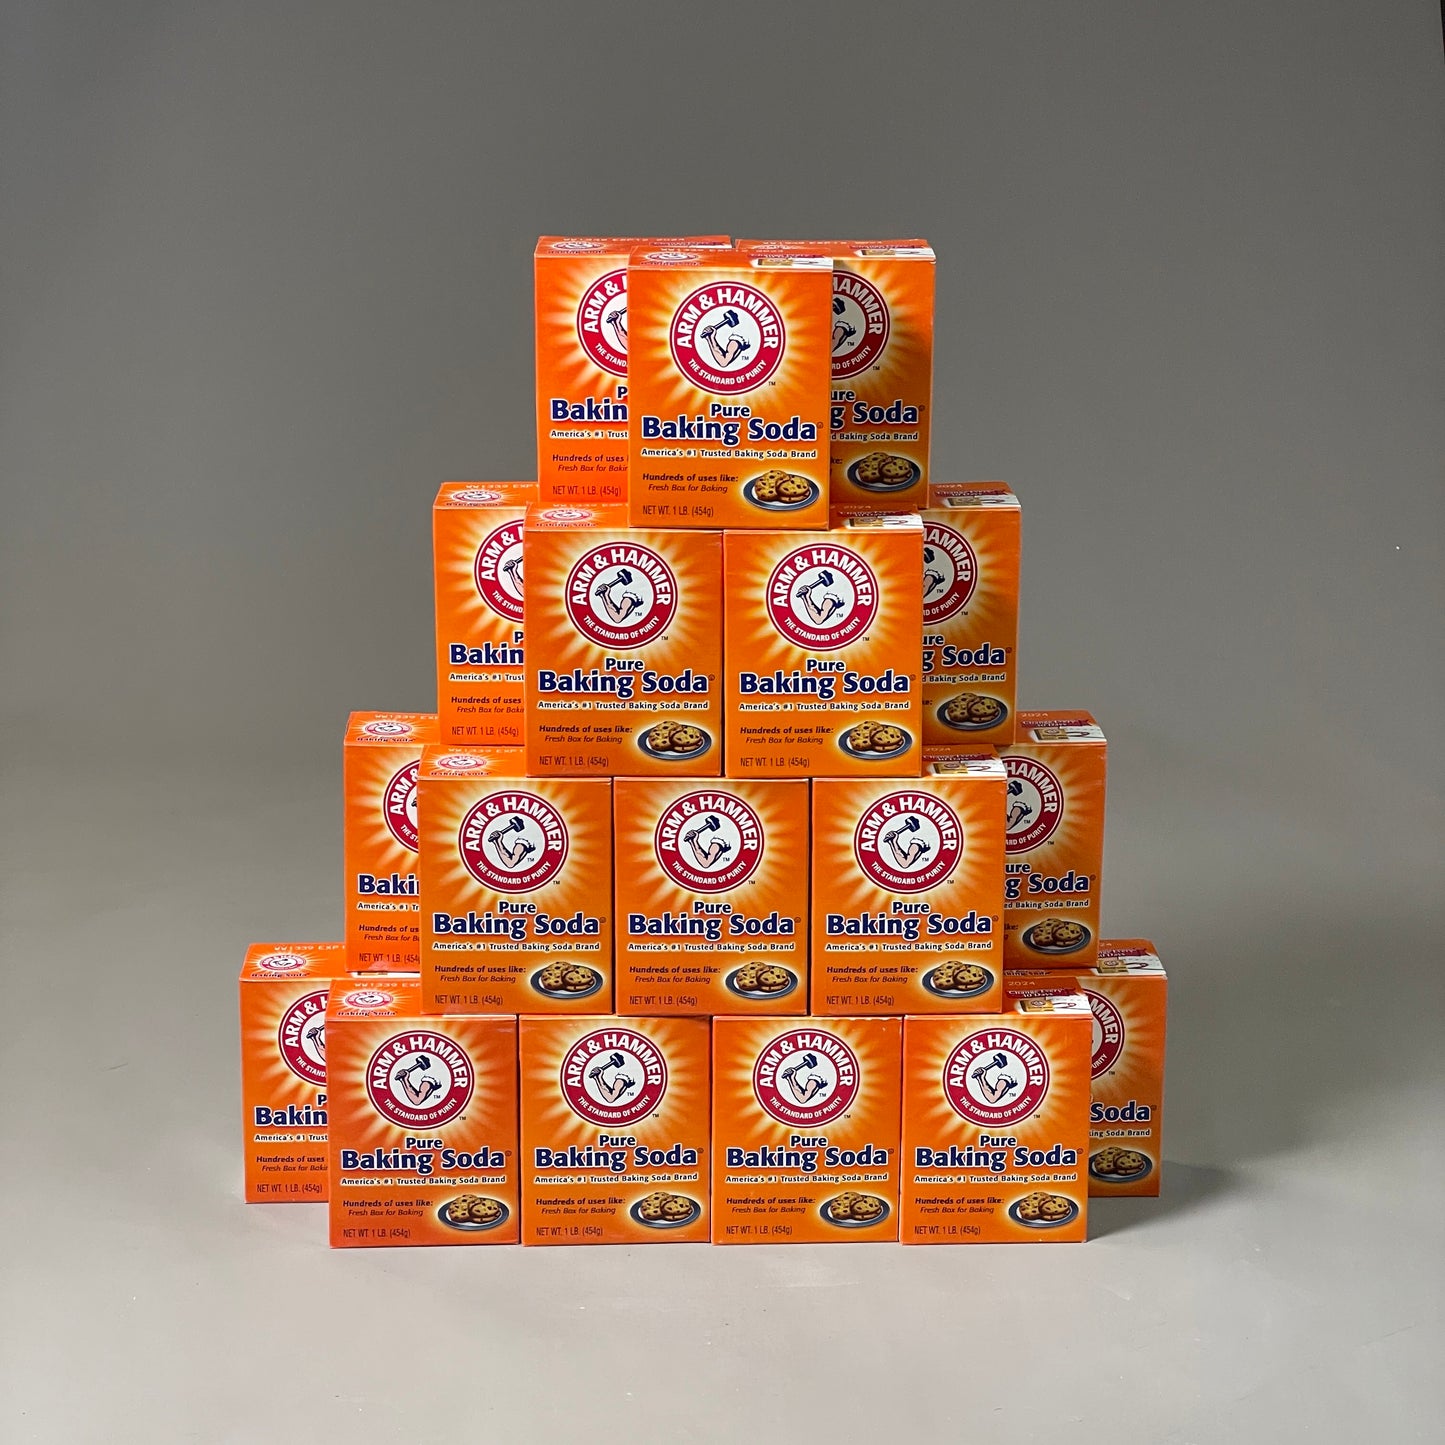 ARM & HAMMER Pure Baking Soda 24-Pack 1 Lb Boxes Exp 12/24 (New)